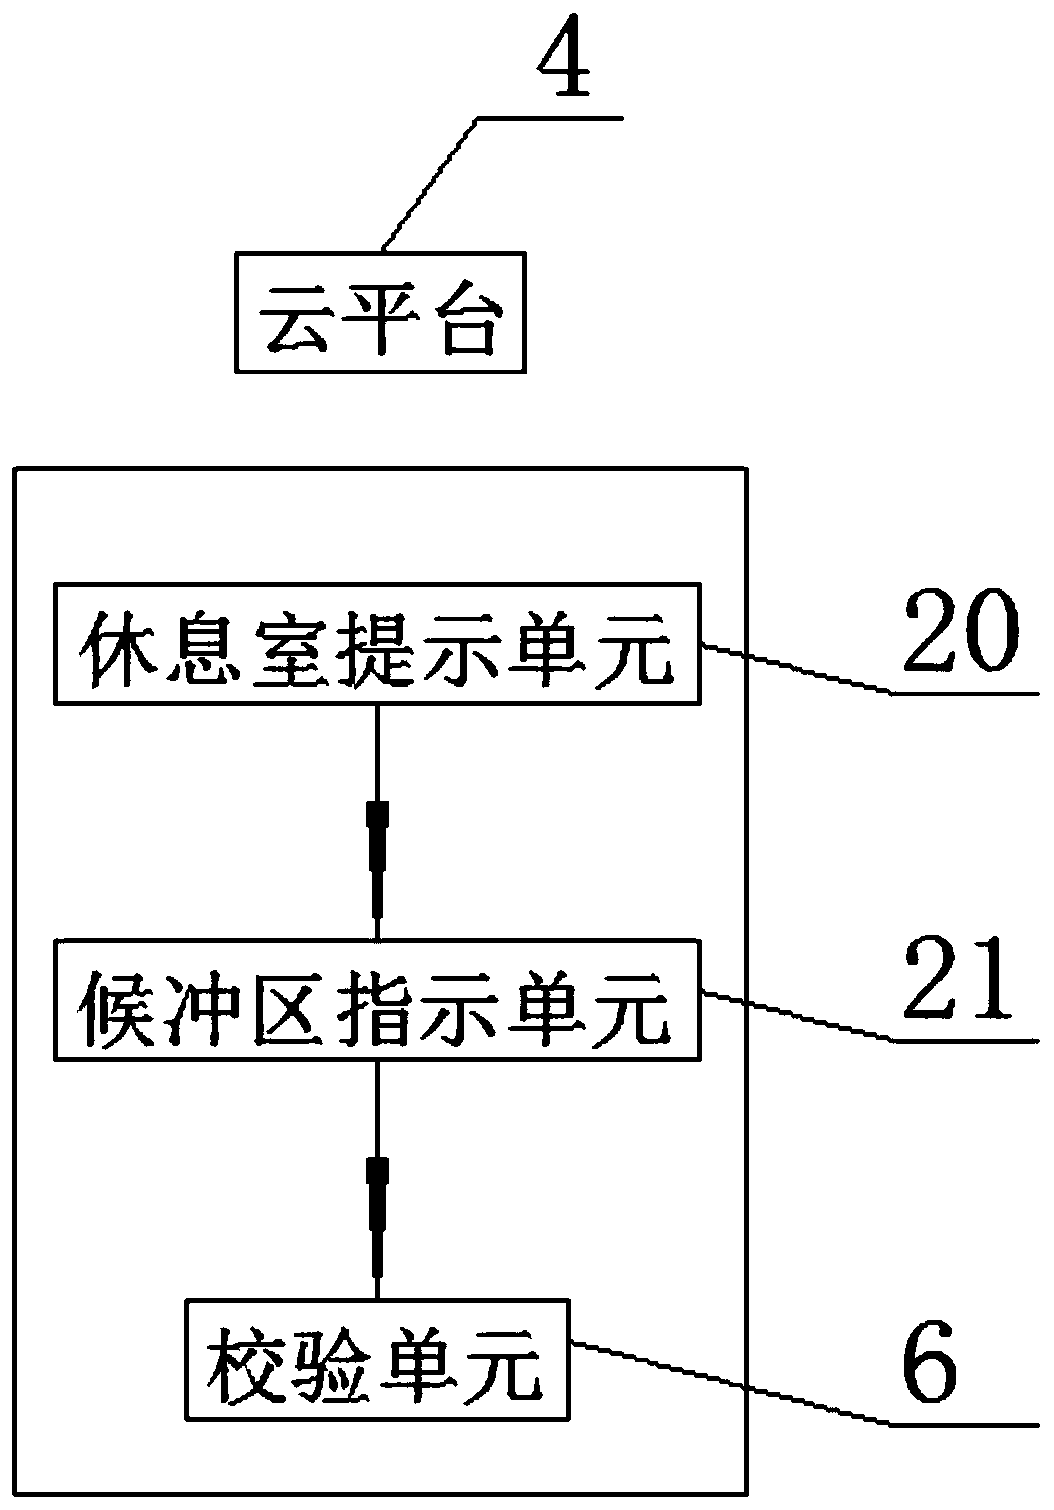 Electrical vehicle charging station operation management system